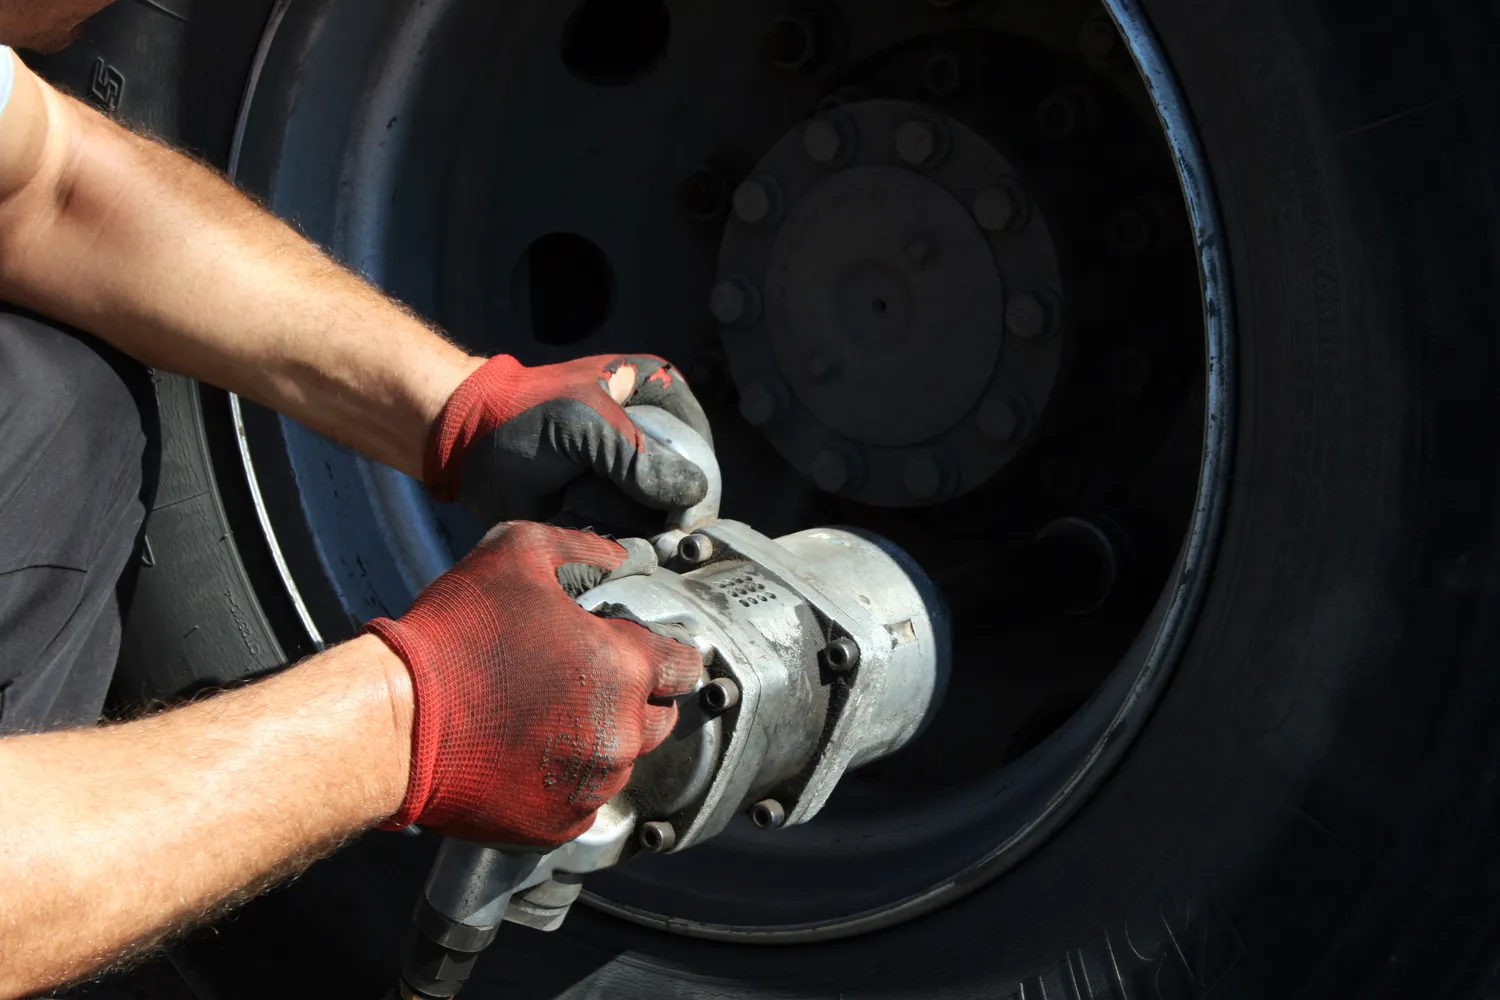 mobile semi tire repair which is on the spot tire inflation